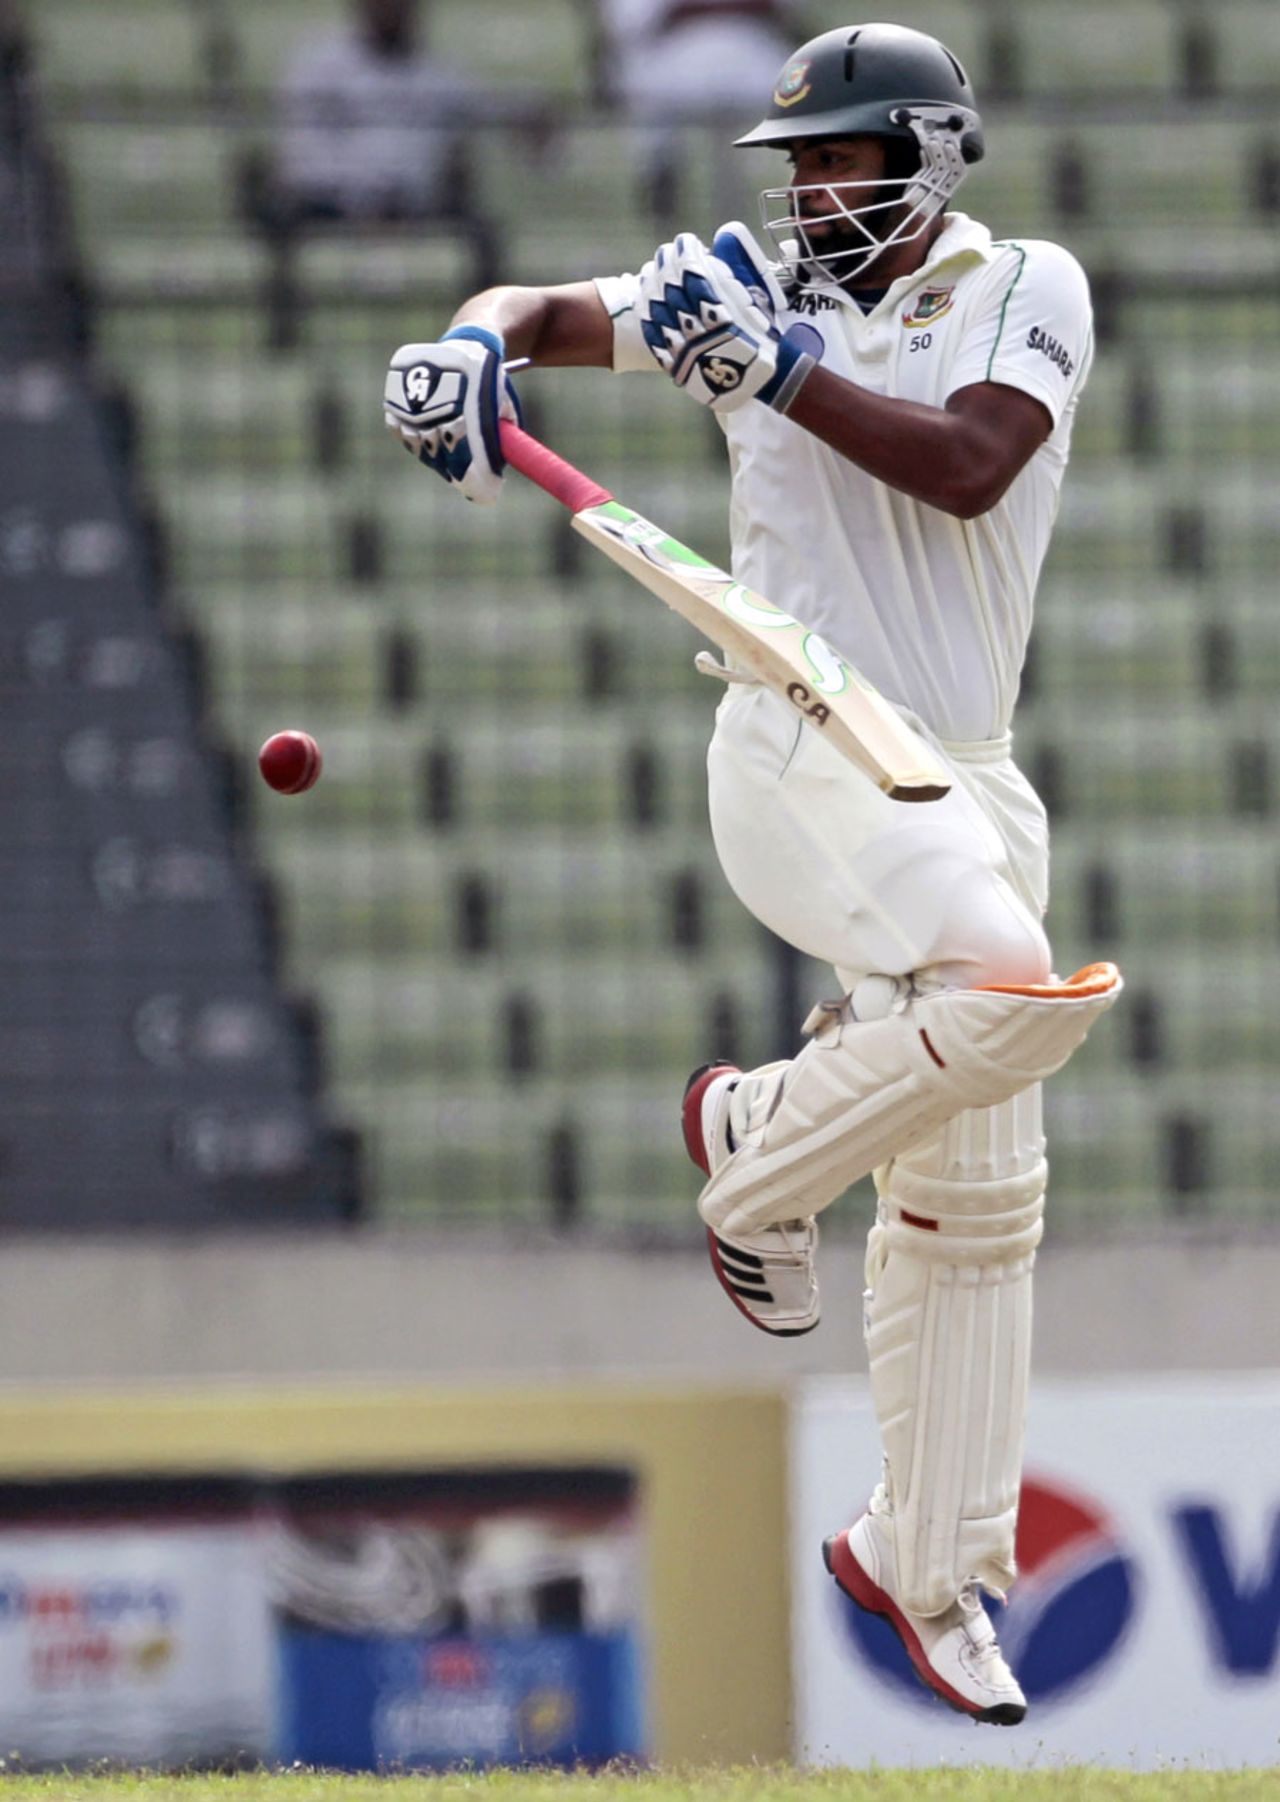 Tamim Iqbal tackles a rising delivery, Bangladesh v New Zealand, 2nd Test, 1st day, Mirpur, October 21, 2013